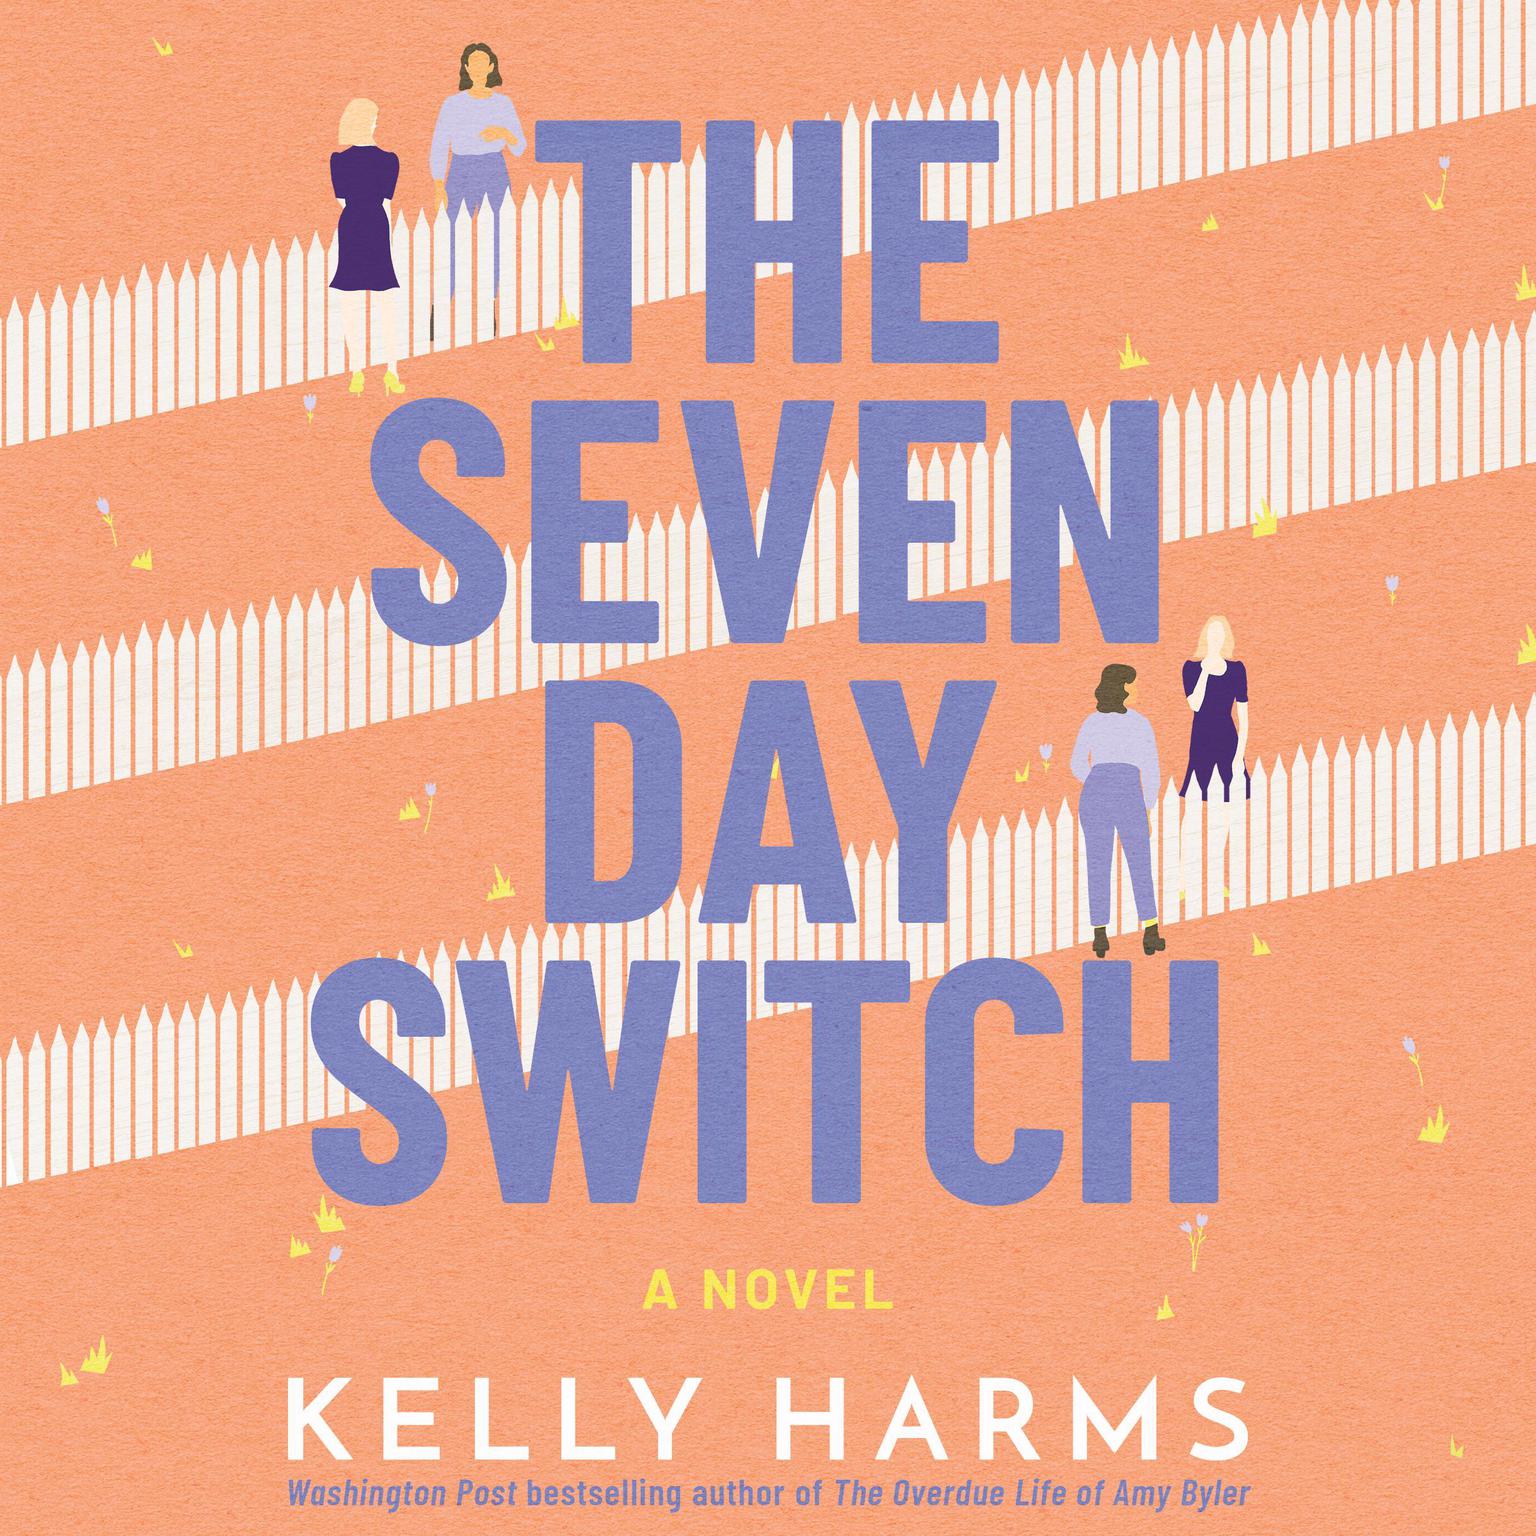 The Seven Day Switch: A Novel Audiobook, by Kelly Harms